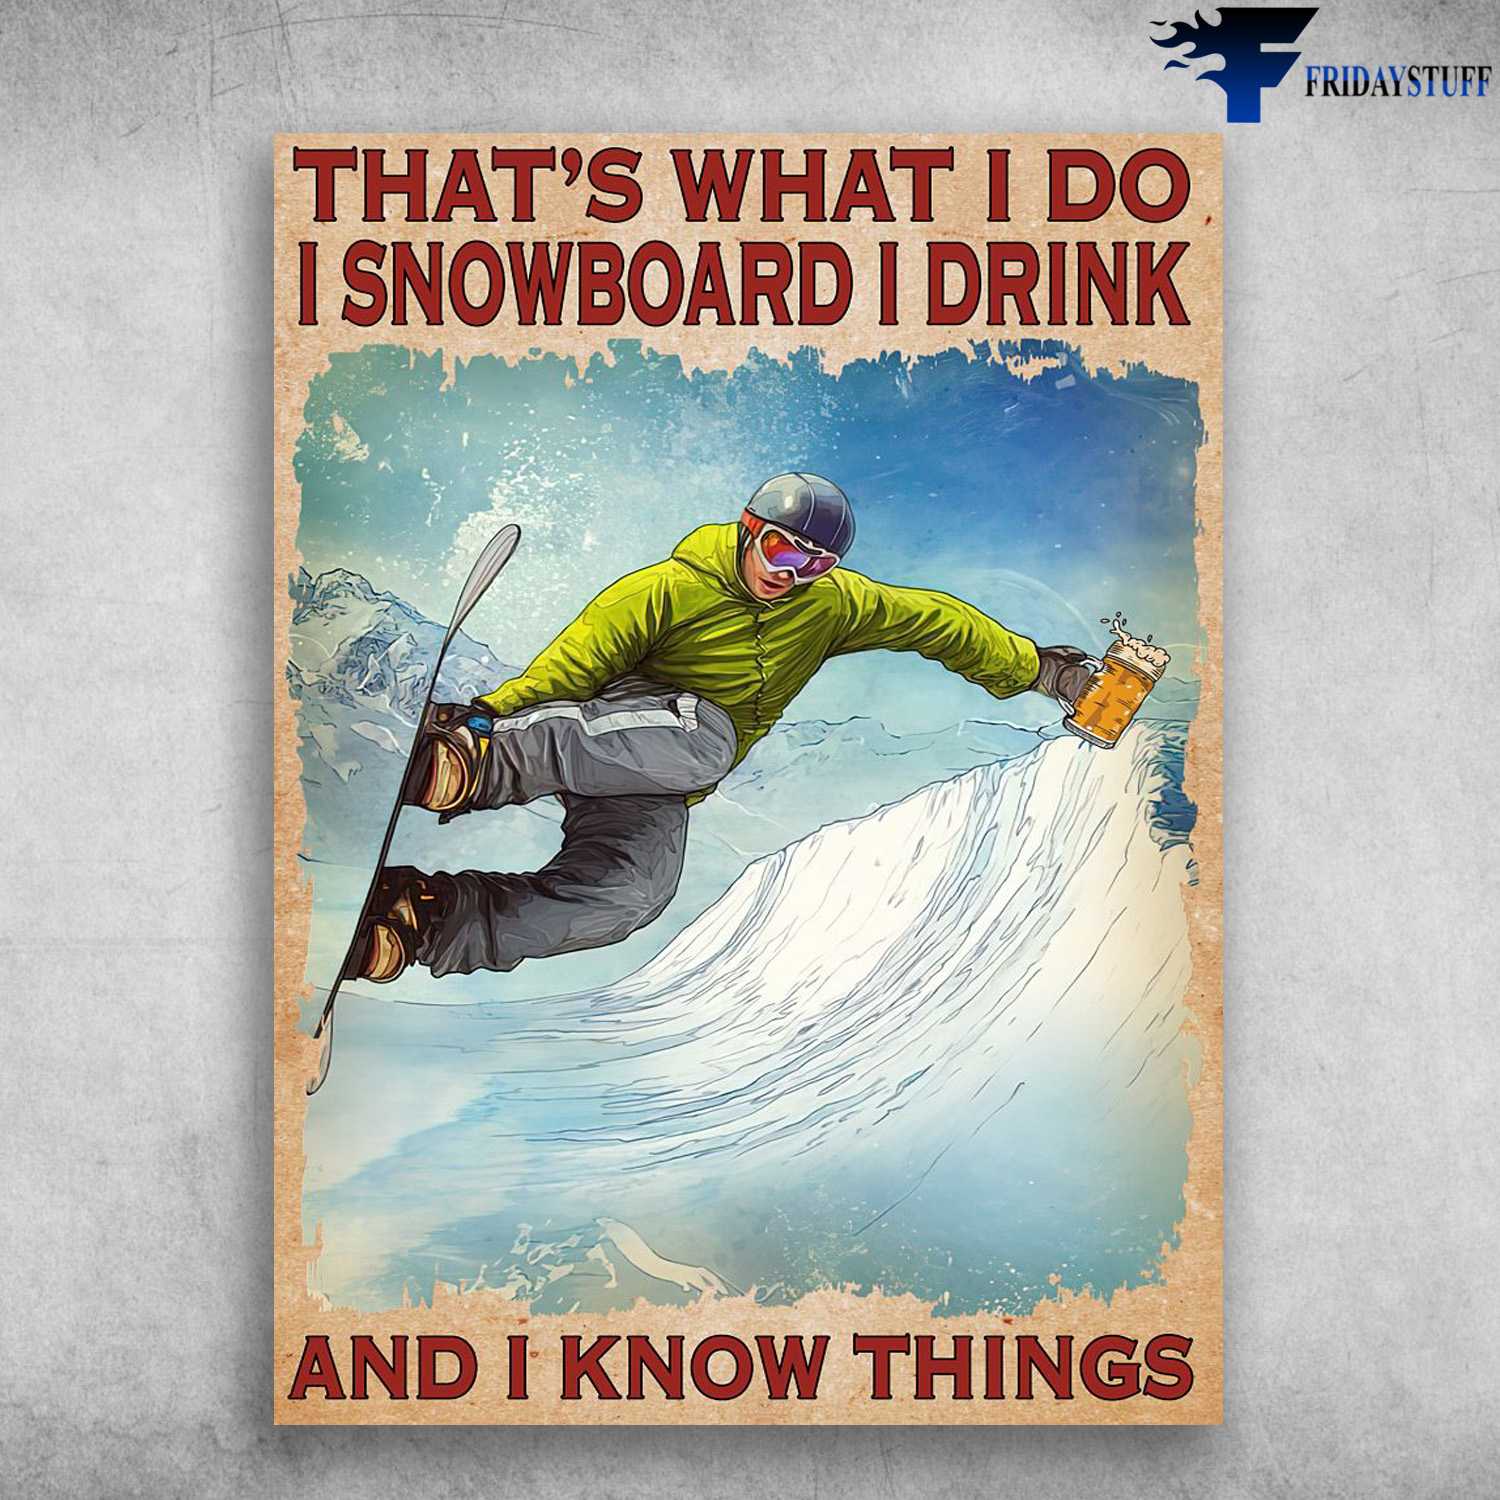 Snowboarding Man, Snowboard With Beer, That's What I Do, I Snowboard, I Drink, And I Know Things